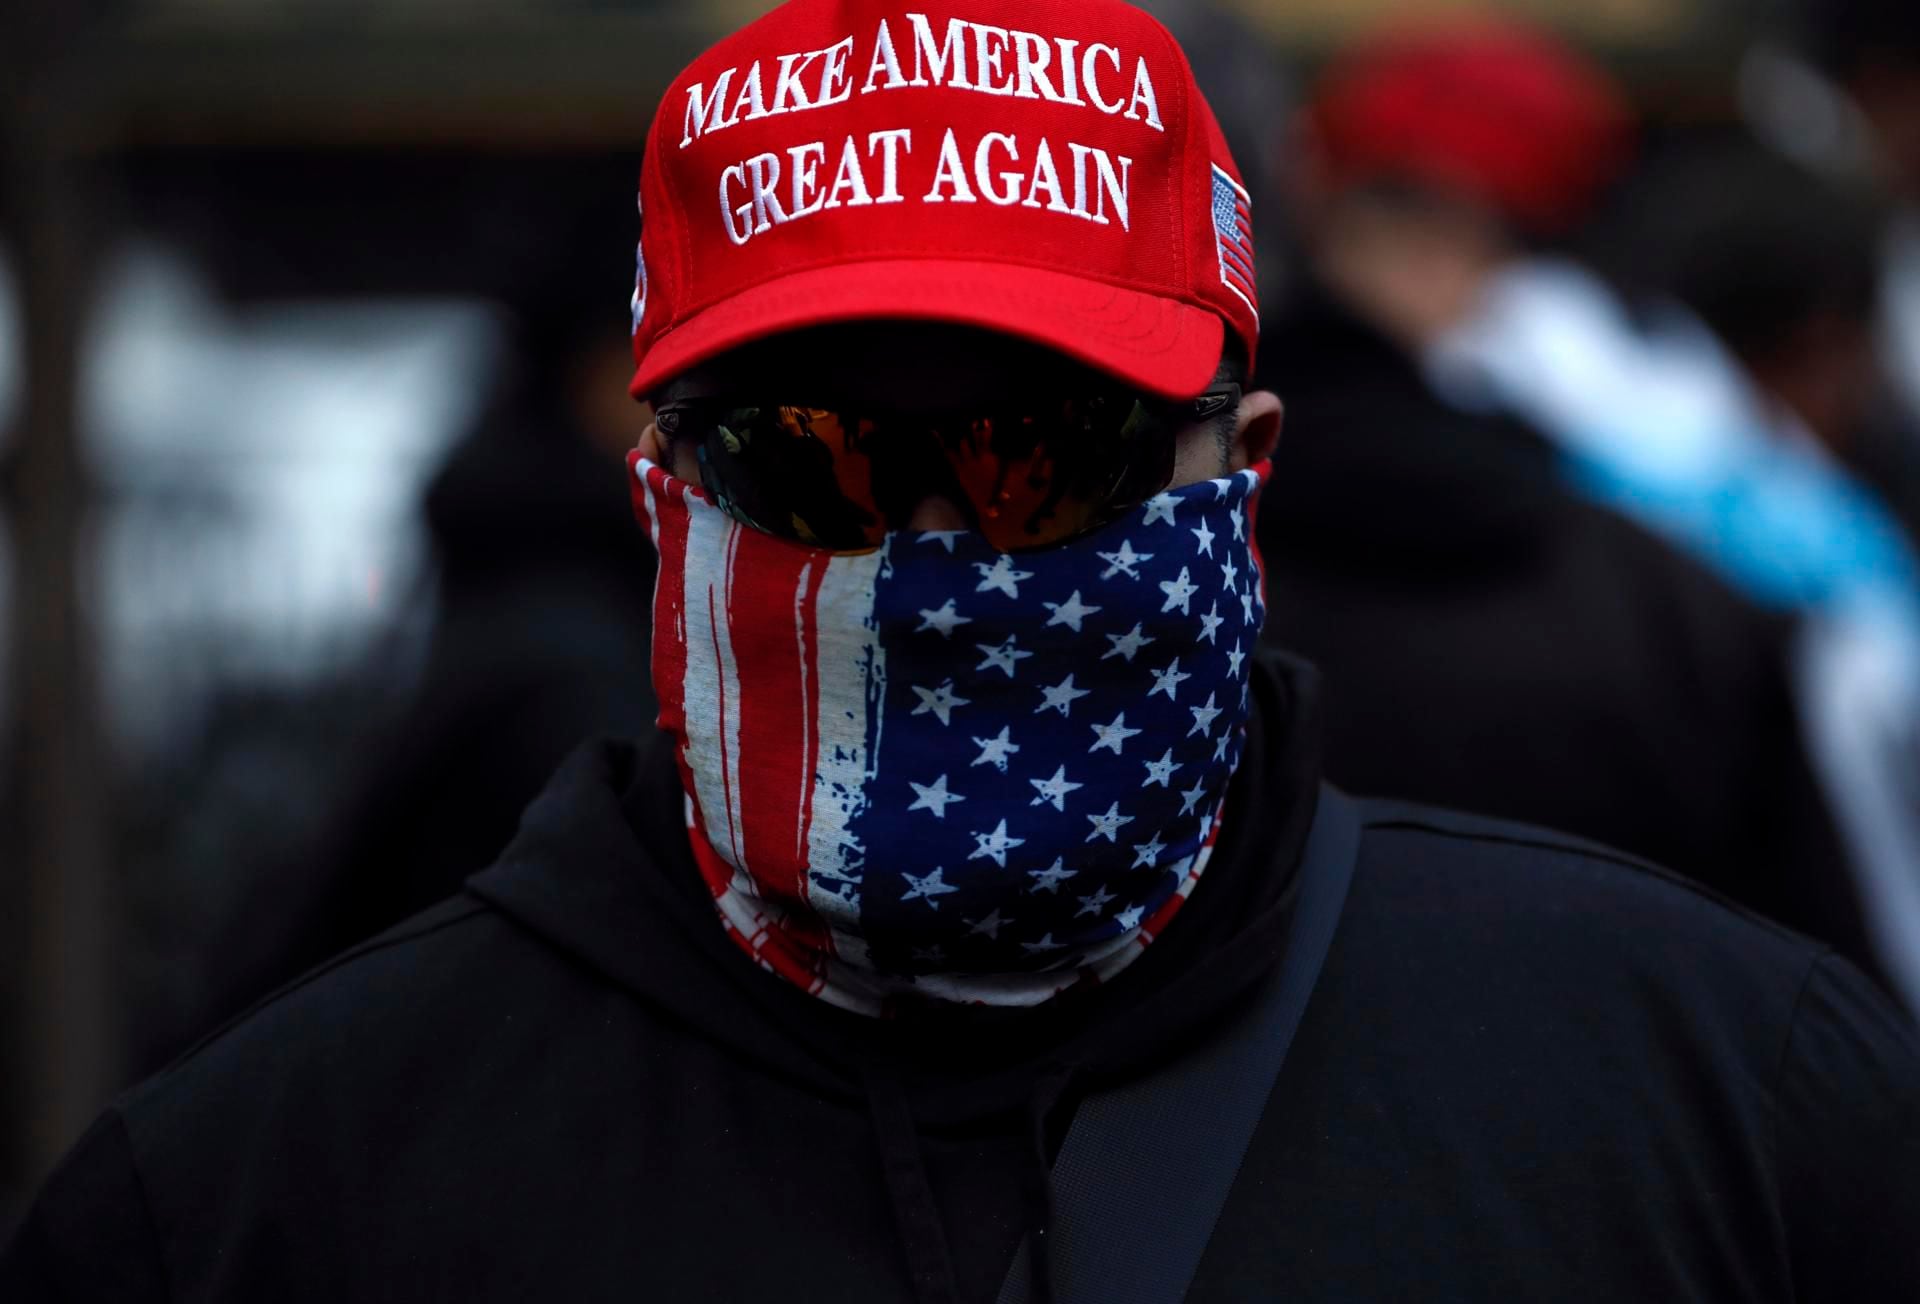 New York (United States), 20/03/2023.- A Trump supporter attends a rally held by the New York Young Republicans outside of New York Criminal Court at a rally for Former President Donald Trump in New York, New York, USA, 20 March 2023. Former President Donald J. Trump posted on his social media platform that he expects to be formally indicted on 21 March, the Manhattan District Attorney's office investigating charges related to hush-money payments to porn star Stormy Daniels has declined to comment on any potential indictment. (Estados Unidos, Nueva York) EFE/EPA/Peter Foley
